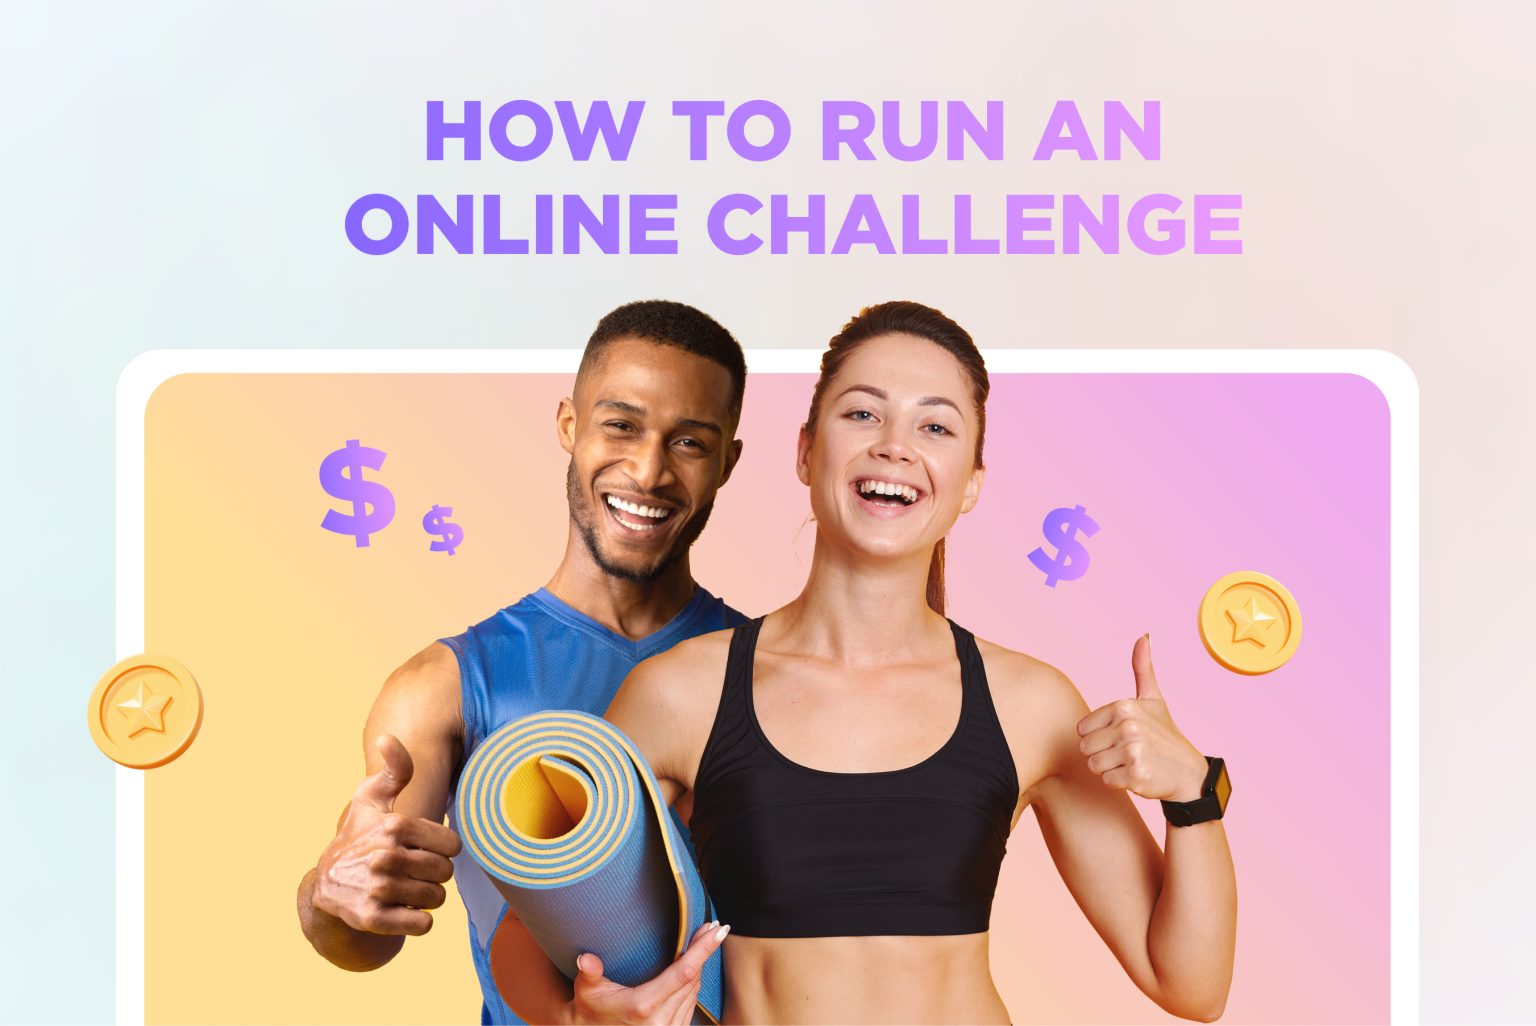 How to run an online challenge using Nas.io